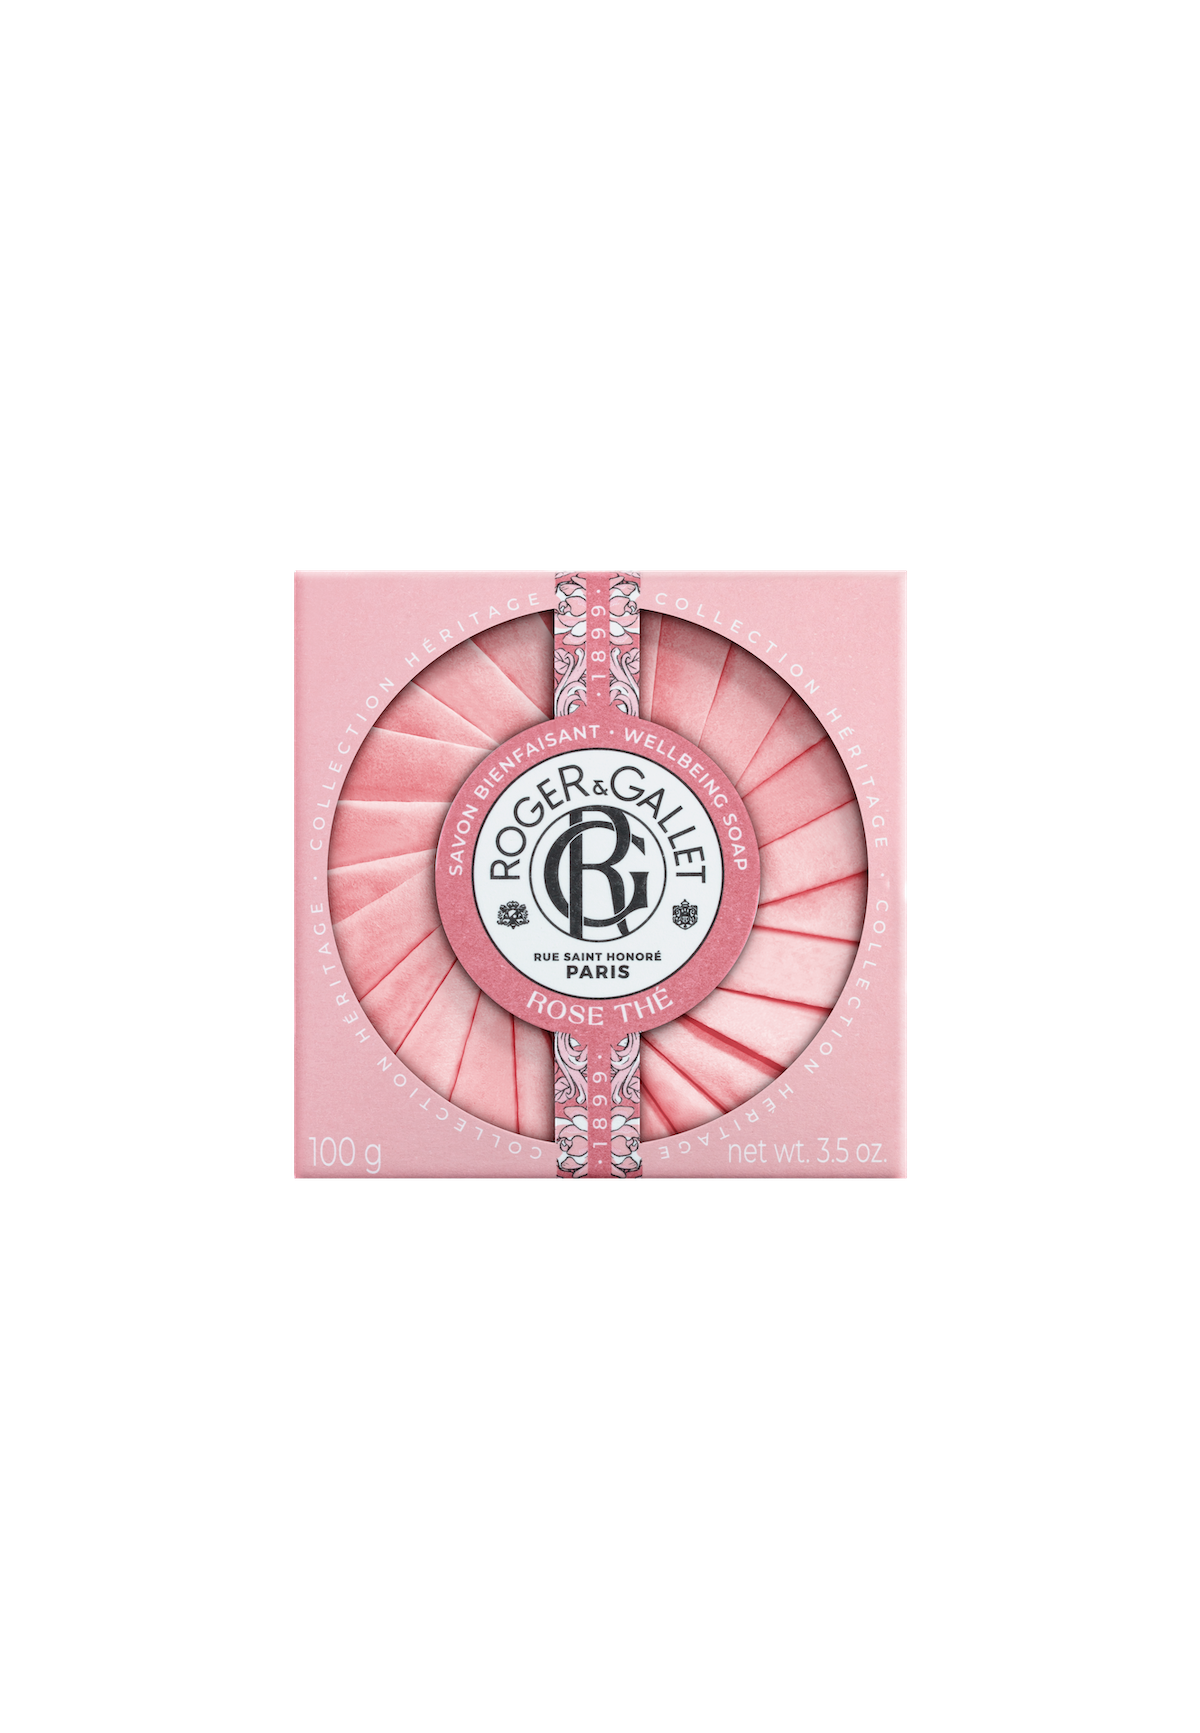 A luxurious Roger & Gallet Rose Wellbeing Soap in an artfully designed round tin with a pink floral motif and sparkling diamond-like accents around the central logo.